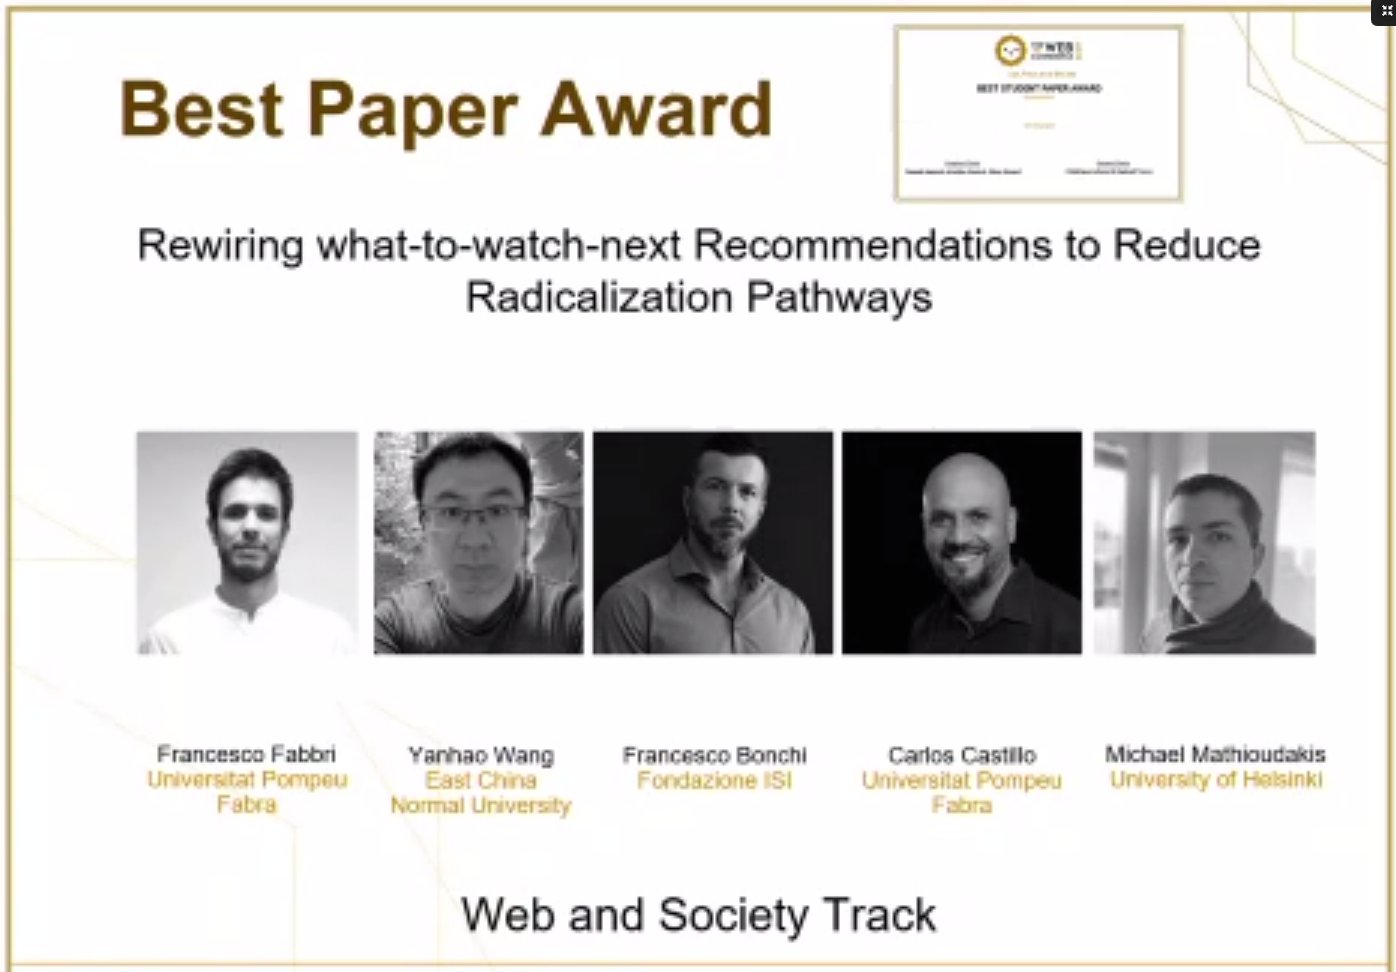 Best paper award at WWW